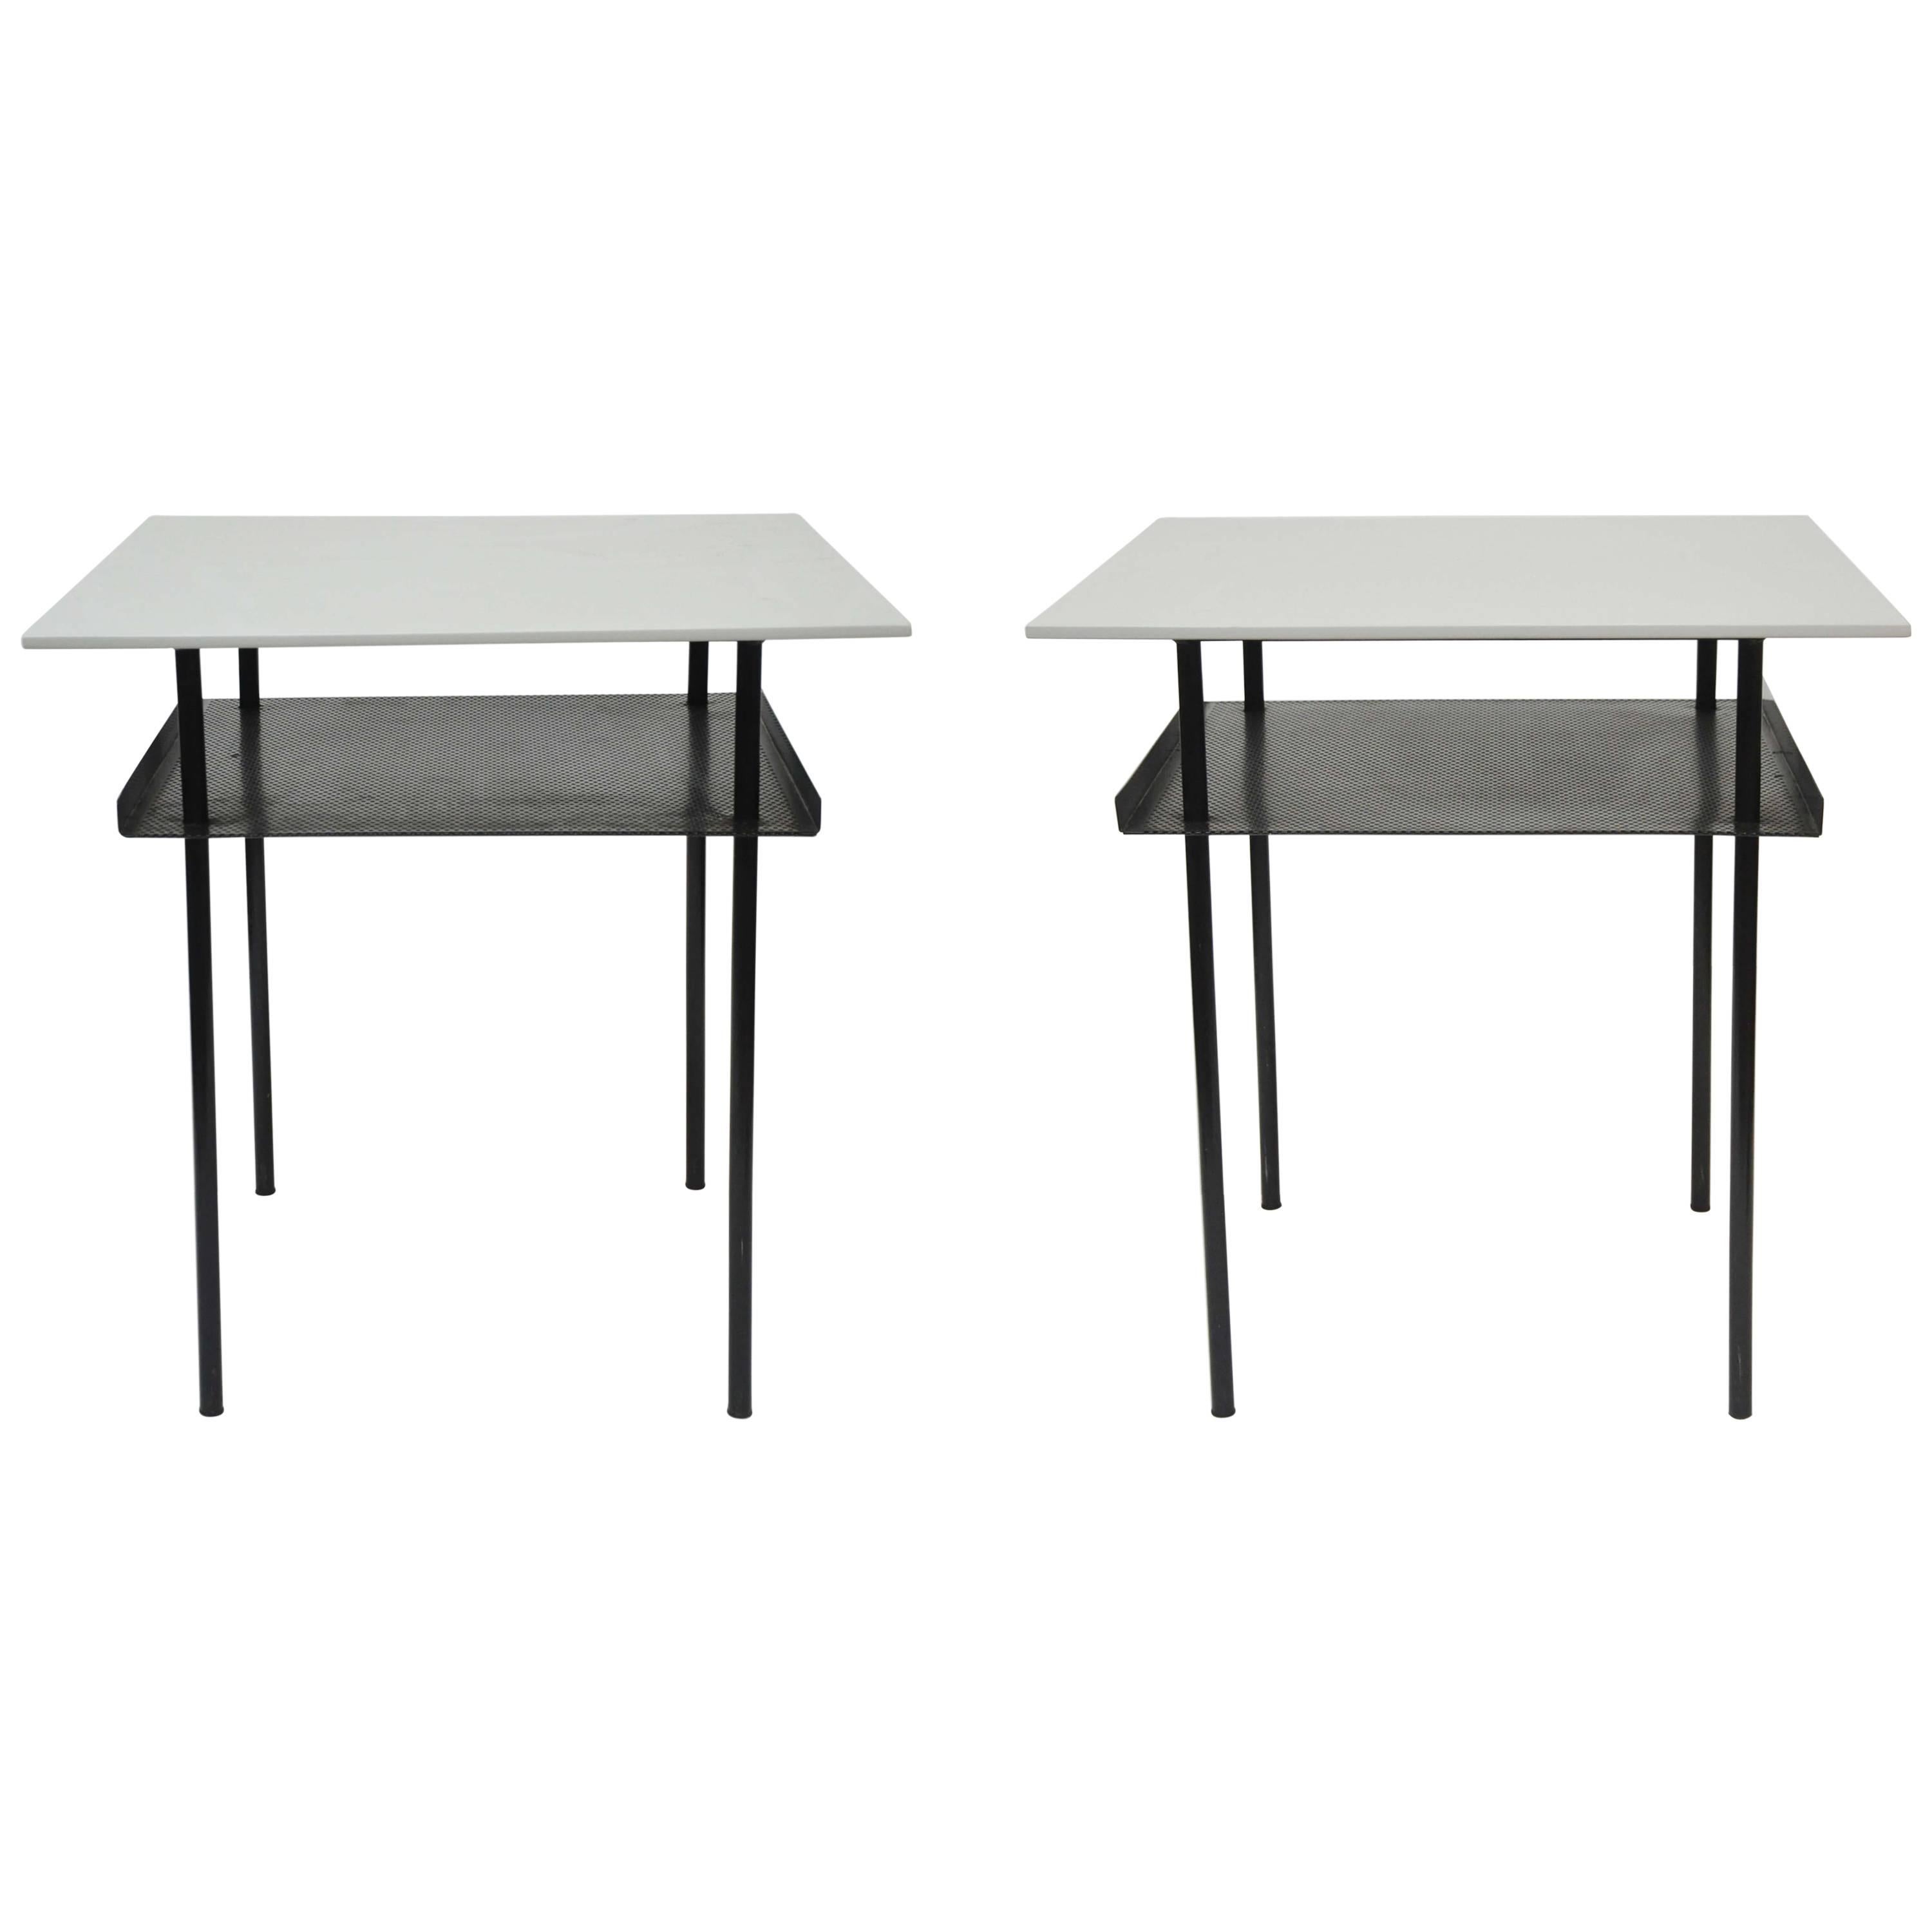 Early 20th-Century Vim Rietveld Auping Side Tables